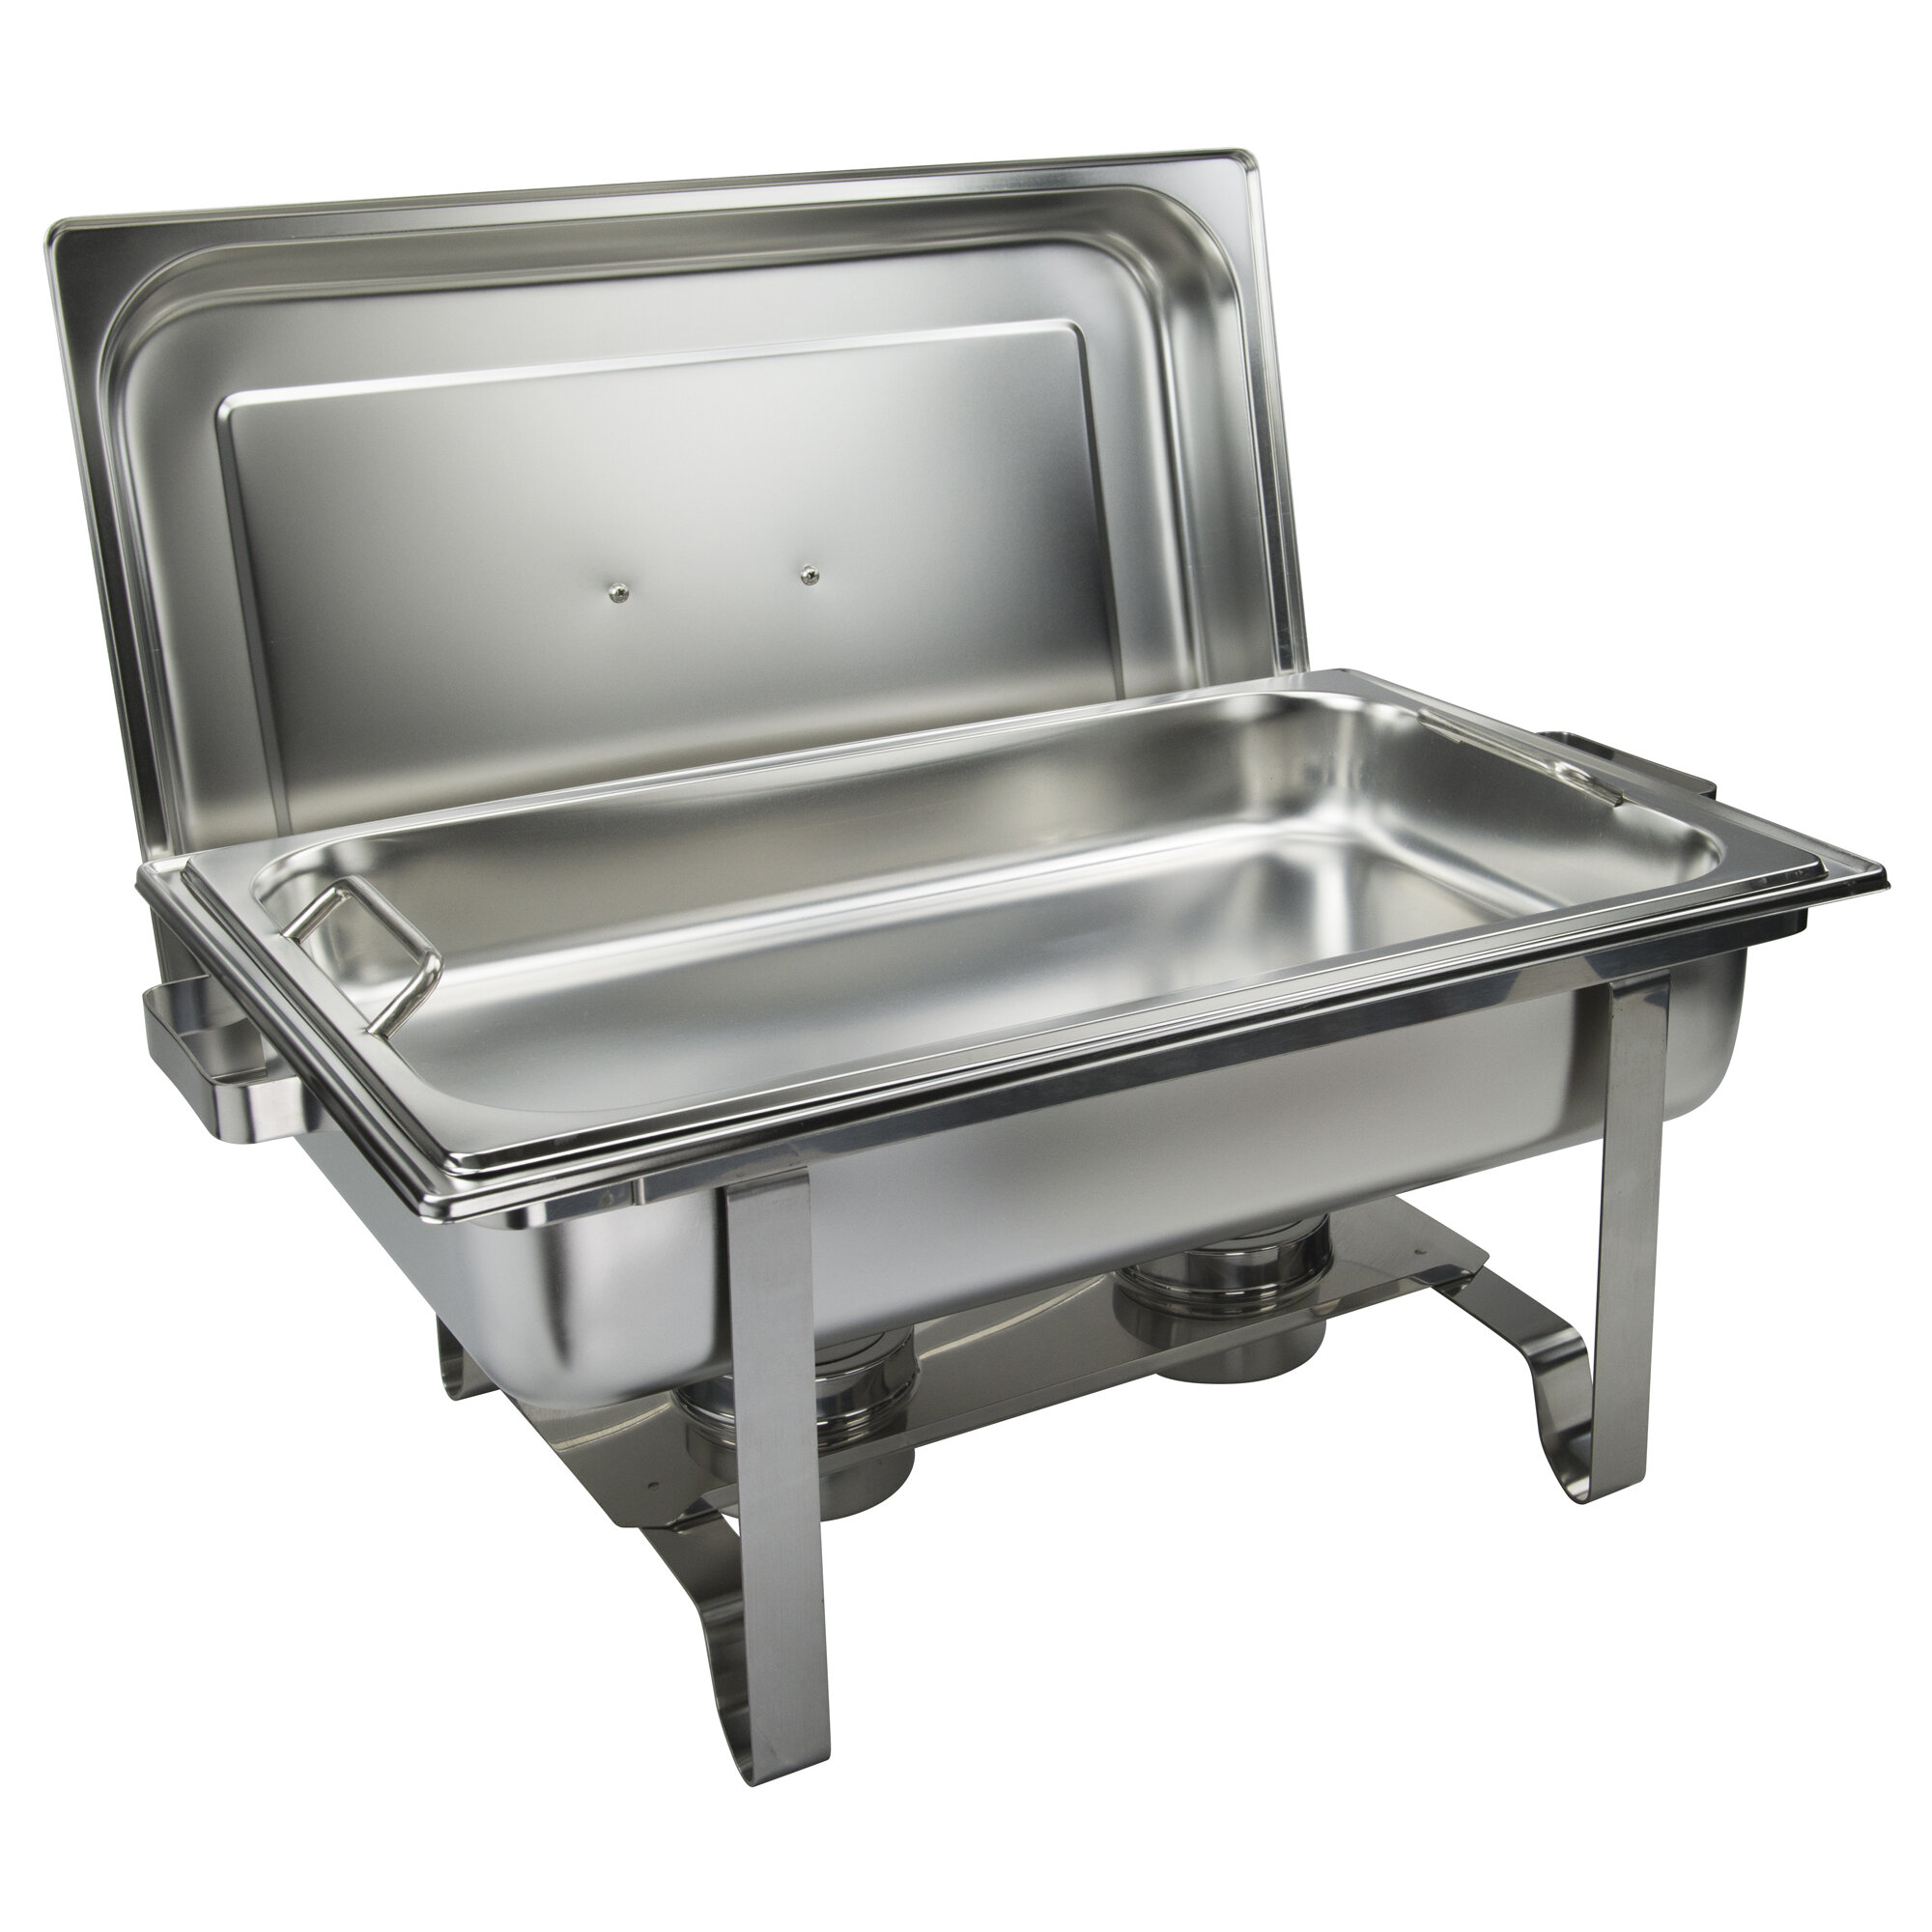 Stainless Steel Chafing Dish Set with 2 Chafing Dish Winco Full Size Chafer 